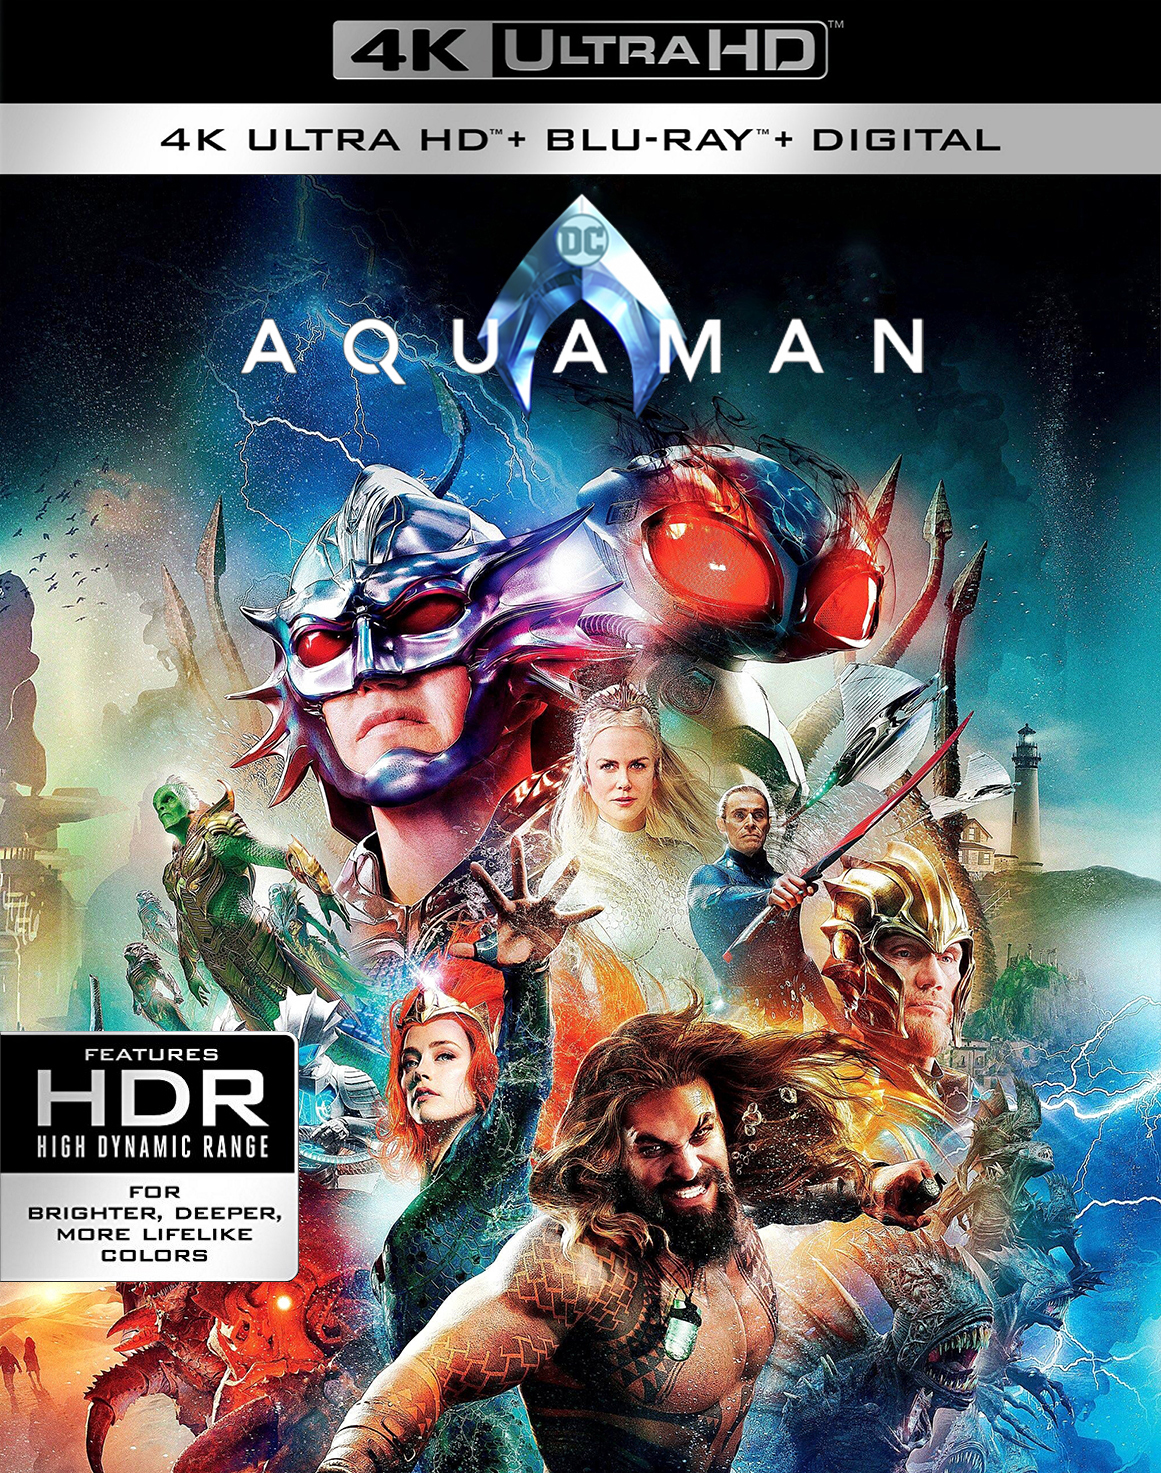 Pre-Order Aquaman (4k UHD) (3D Blu-ray) (Blu-ray) for Preorder | Home Theater Forum